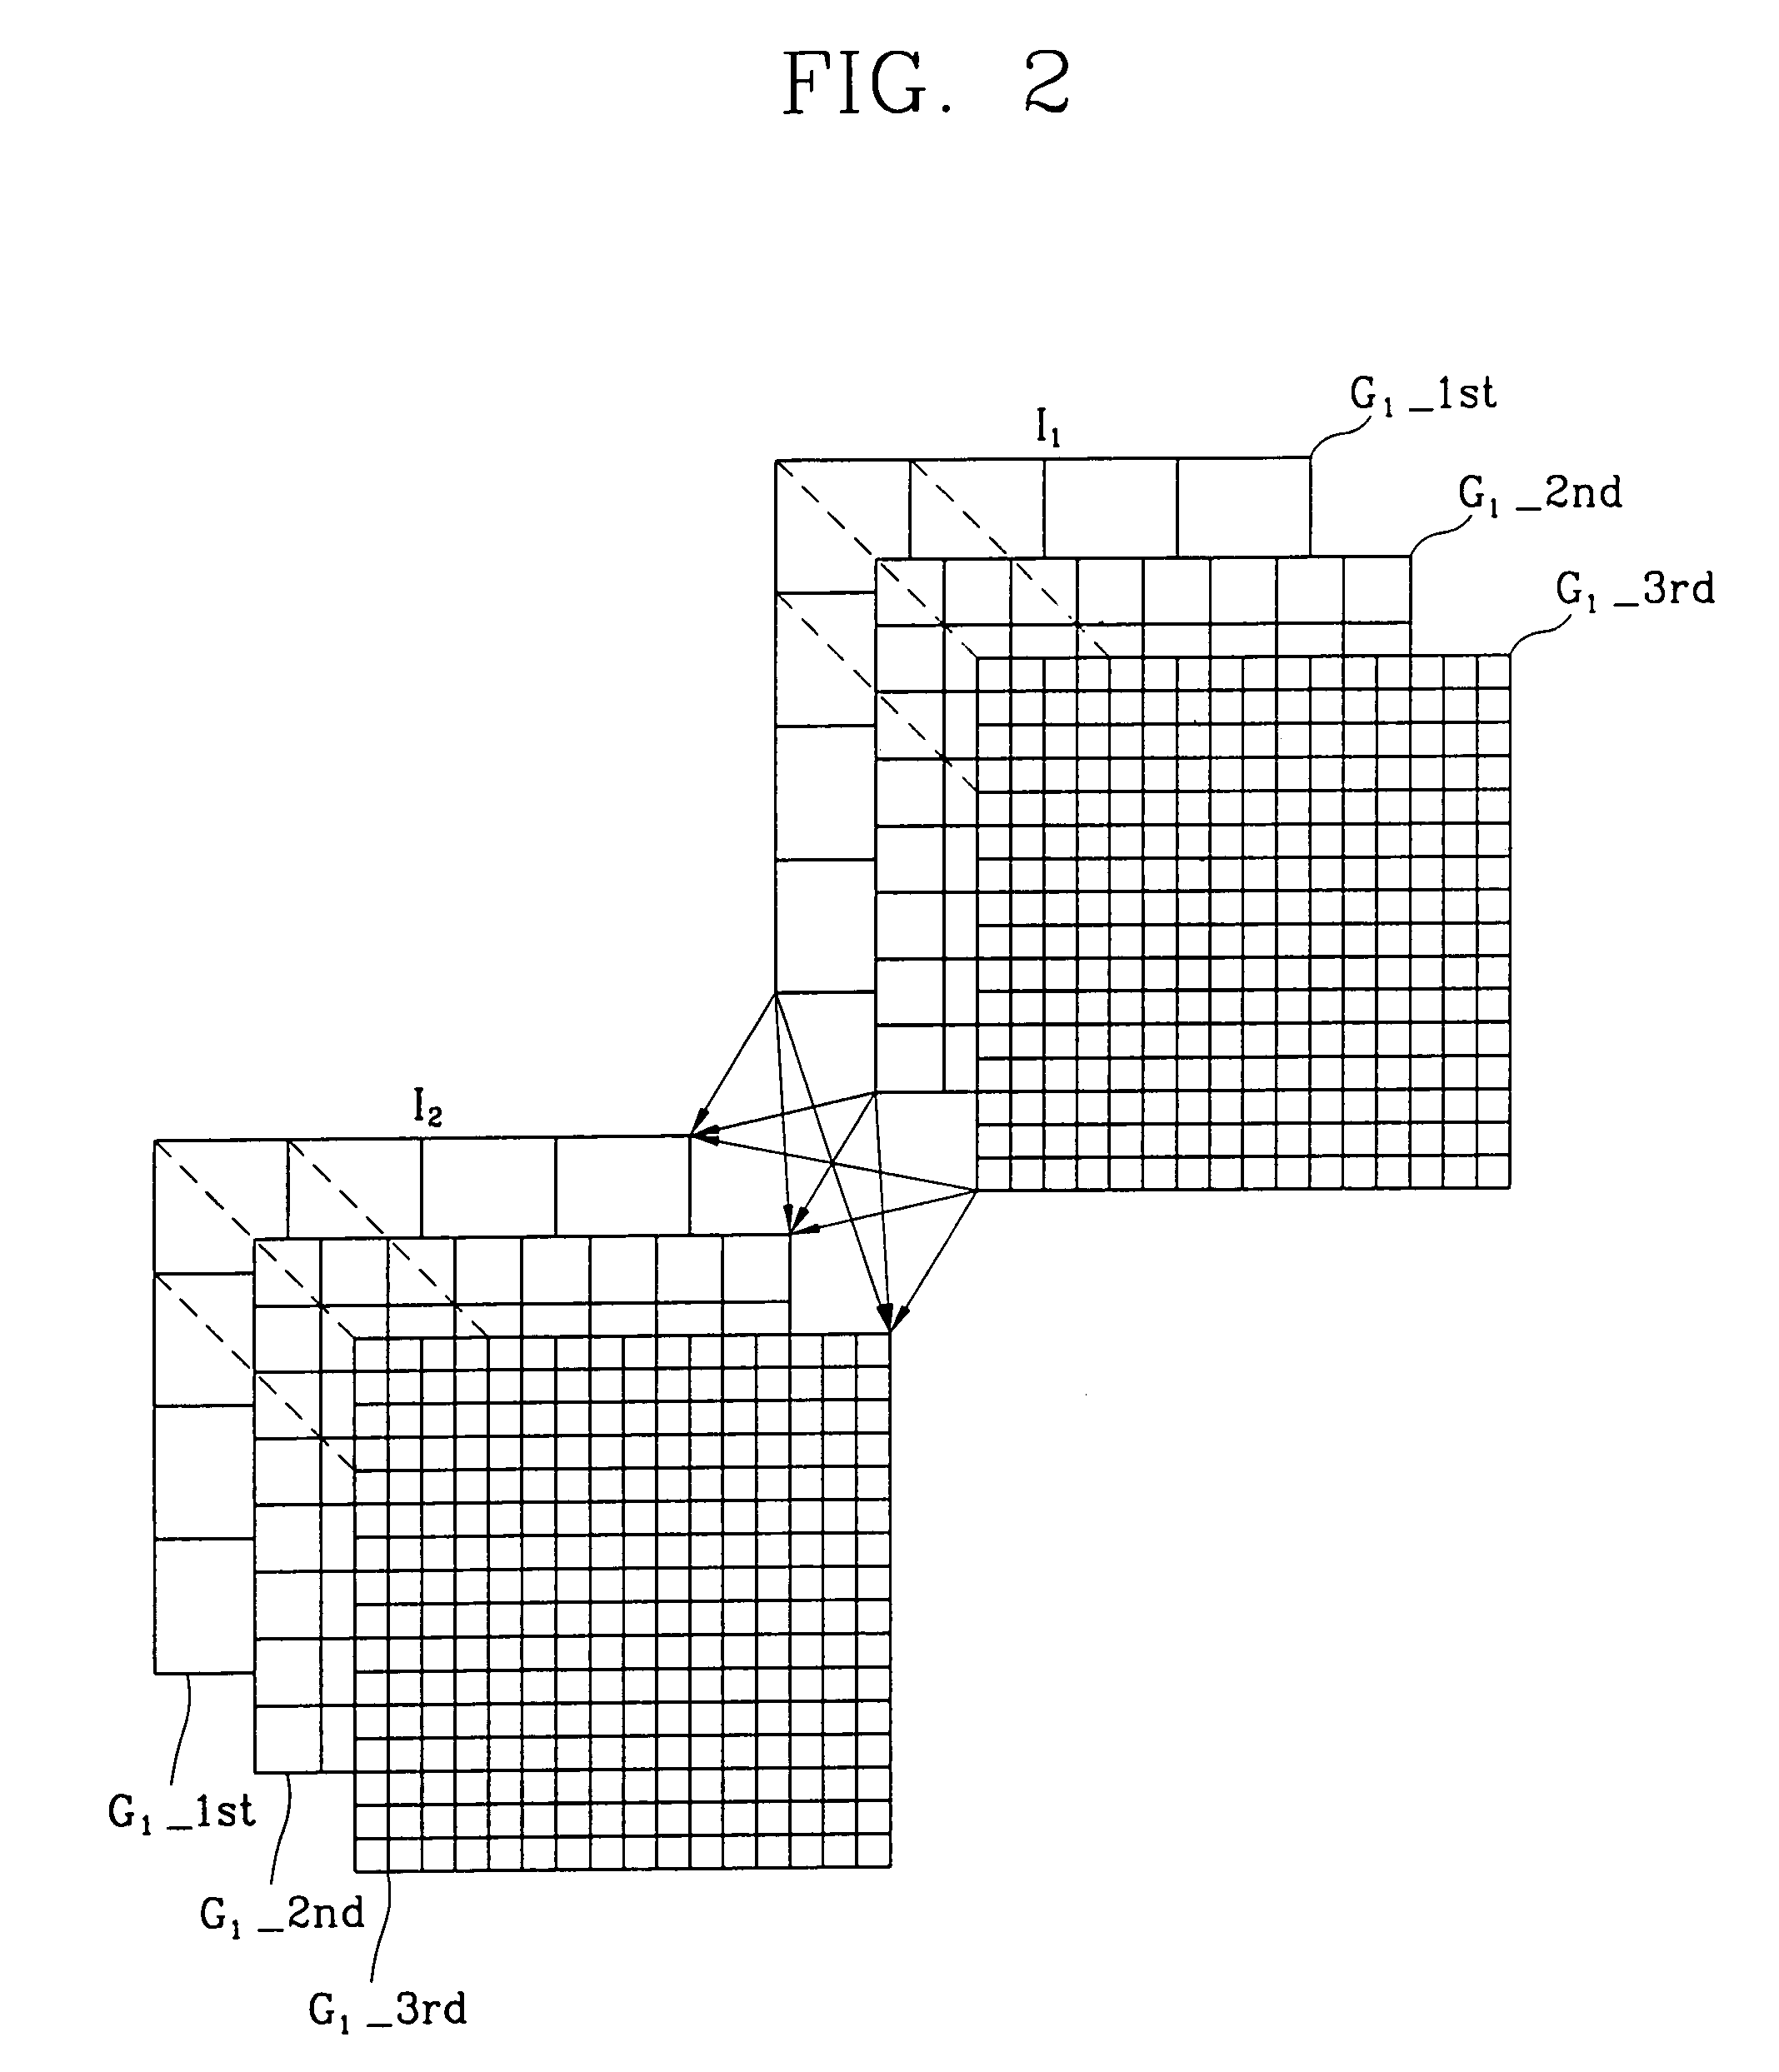 Multilevel image grid data structure and image search method using the same